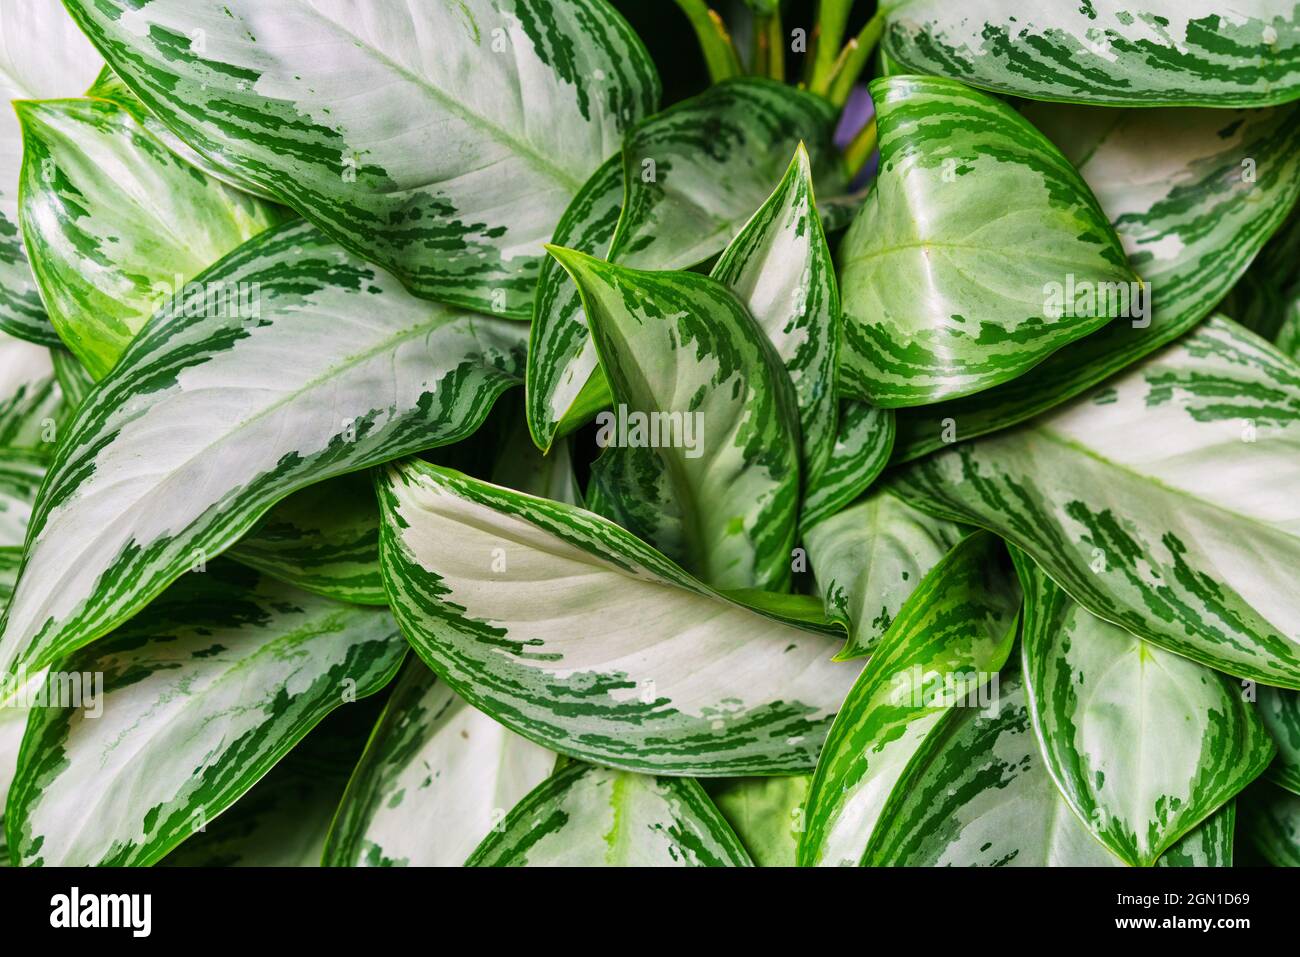 Aglaonema silver bay as a natural background of green leaves with white spots. Indoor plant close up view from above Stock Photo